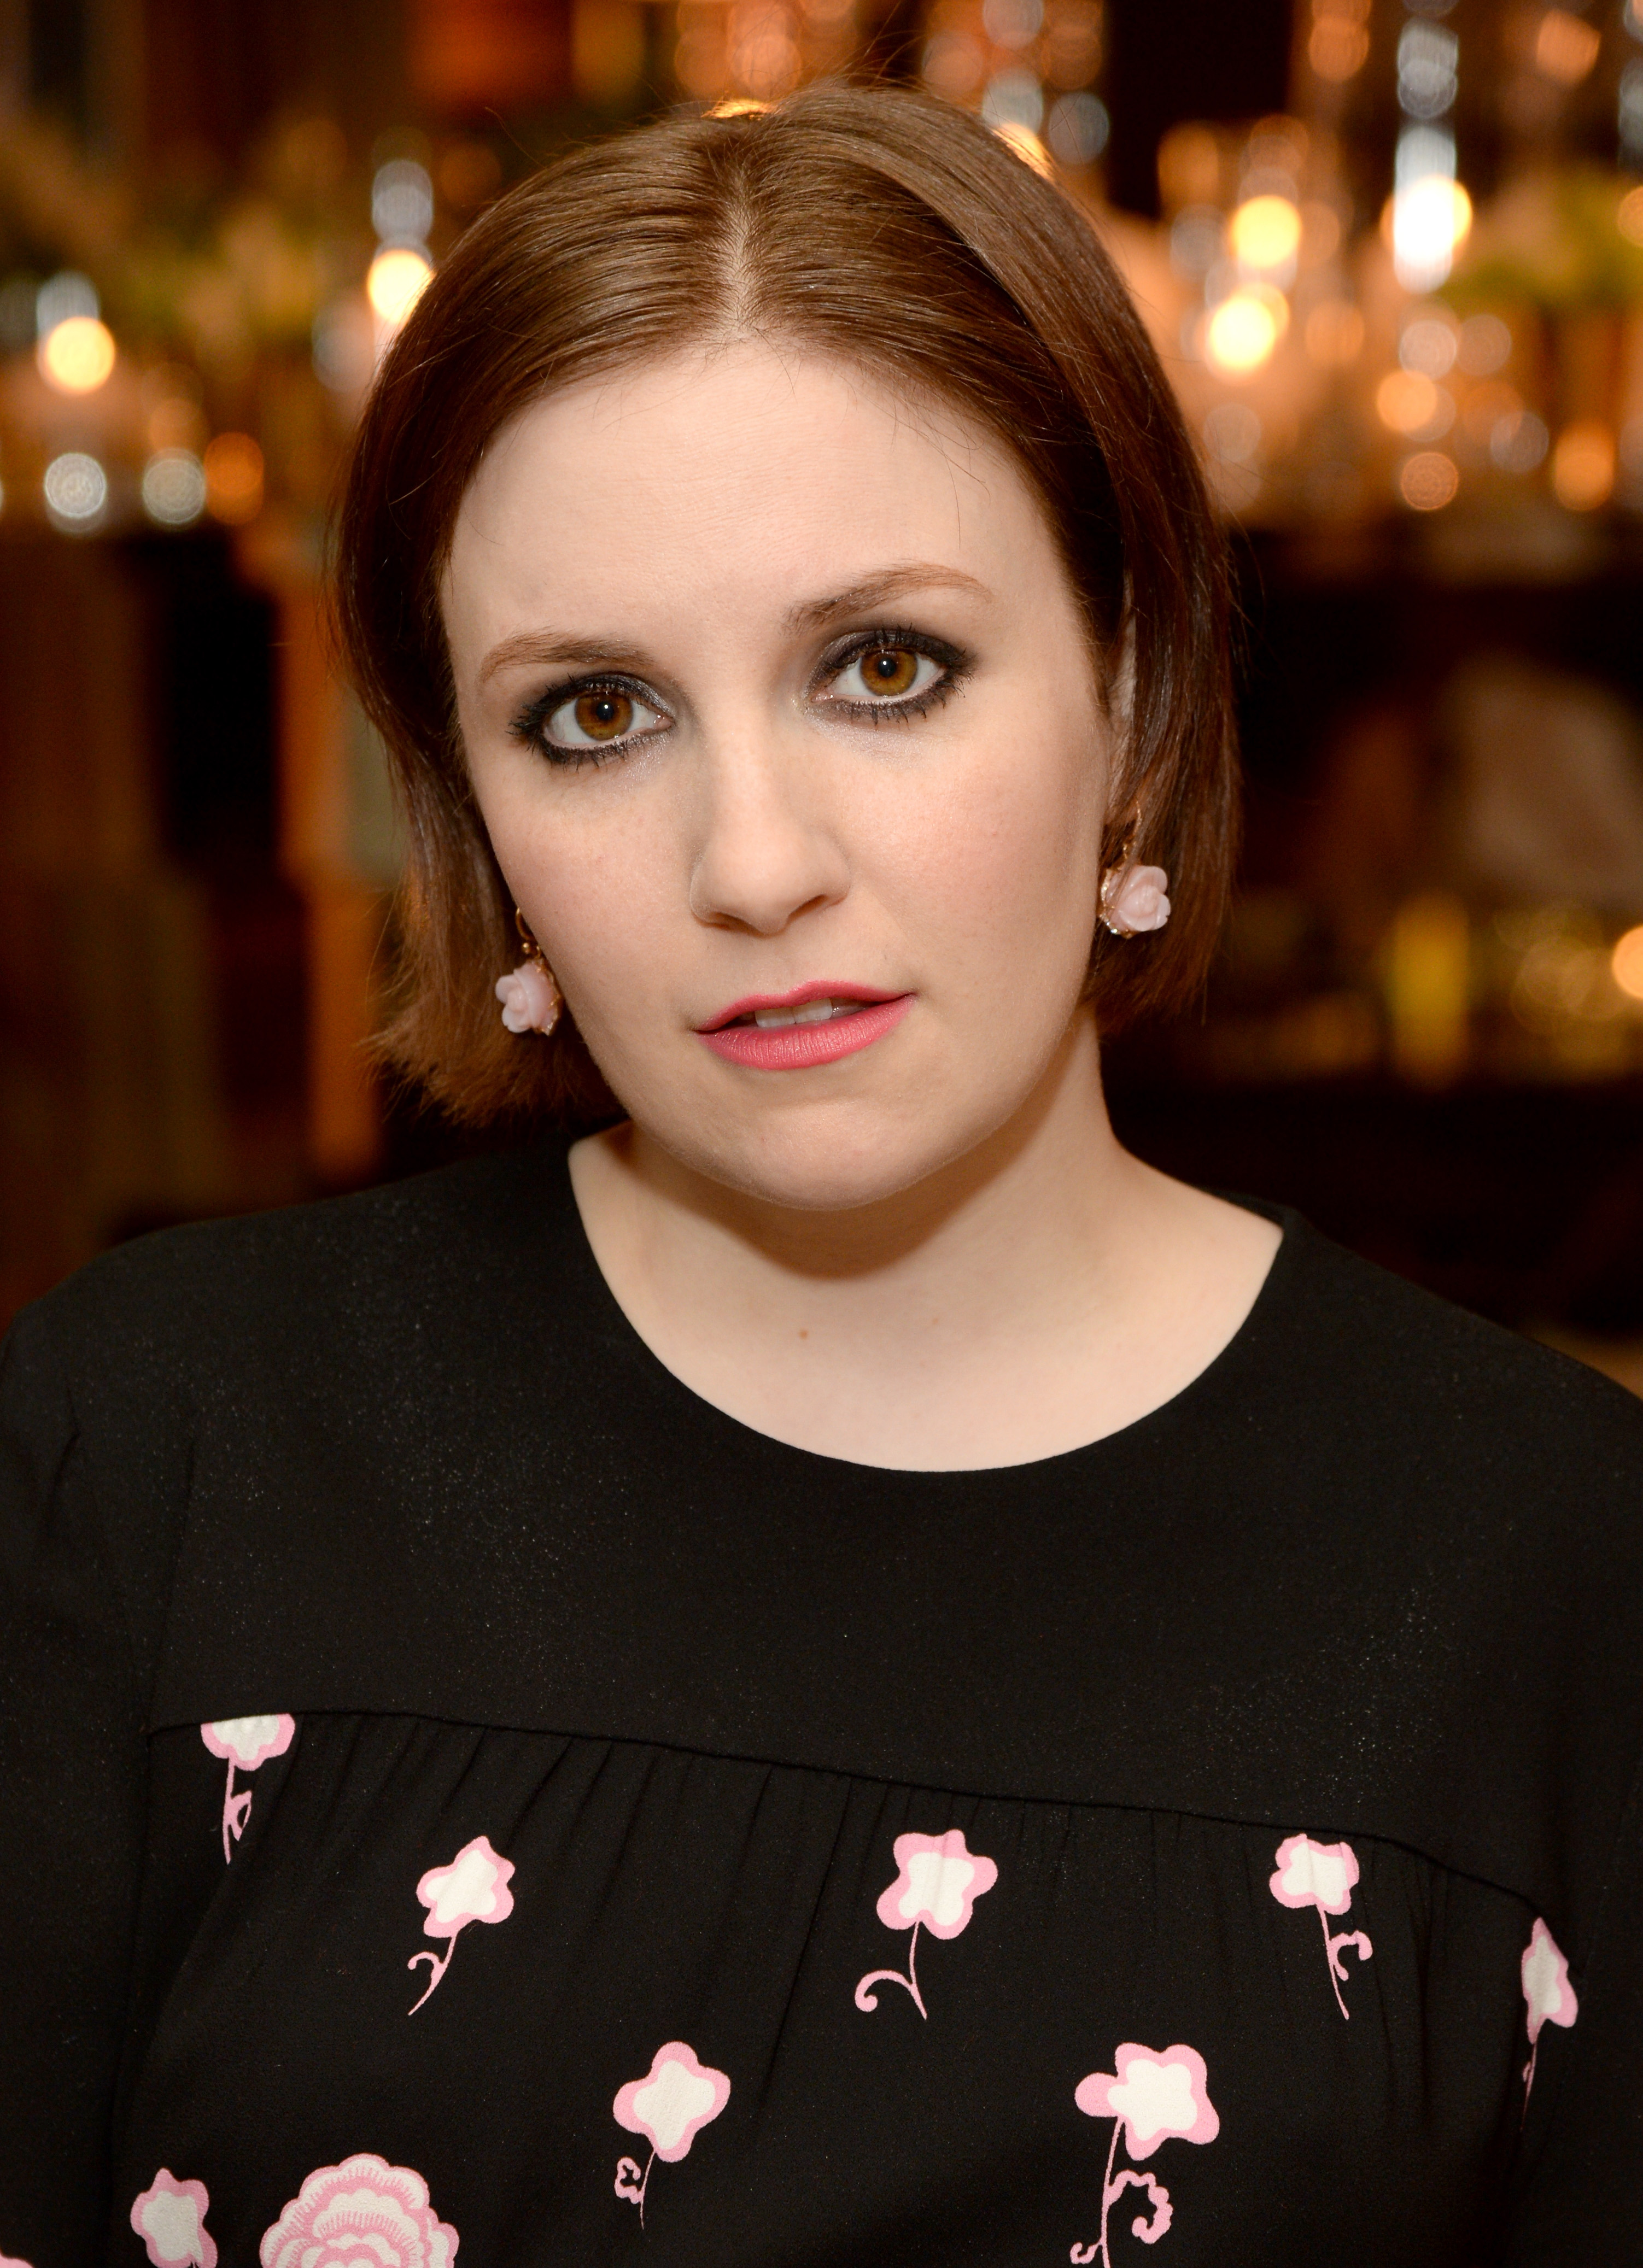 Actress Lena Dunham attends ELLE's Annual Women in Television Celebration on Jan. 13, 2015 in West Hollywood, California.